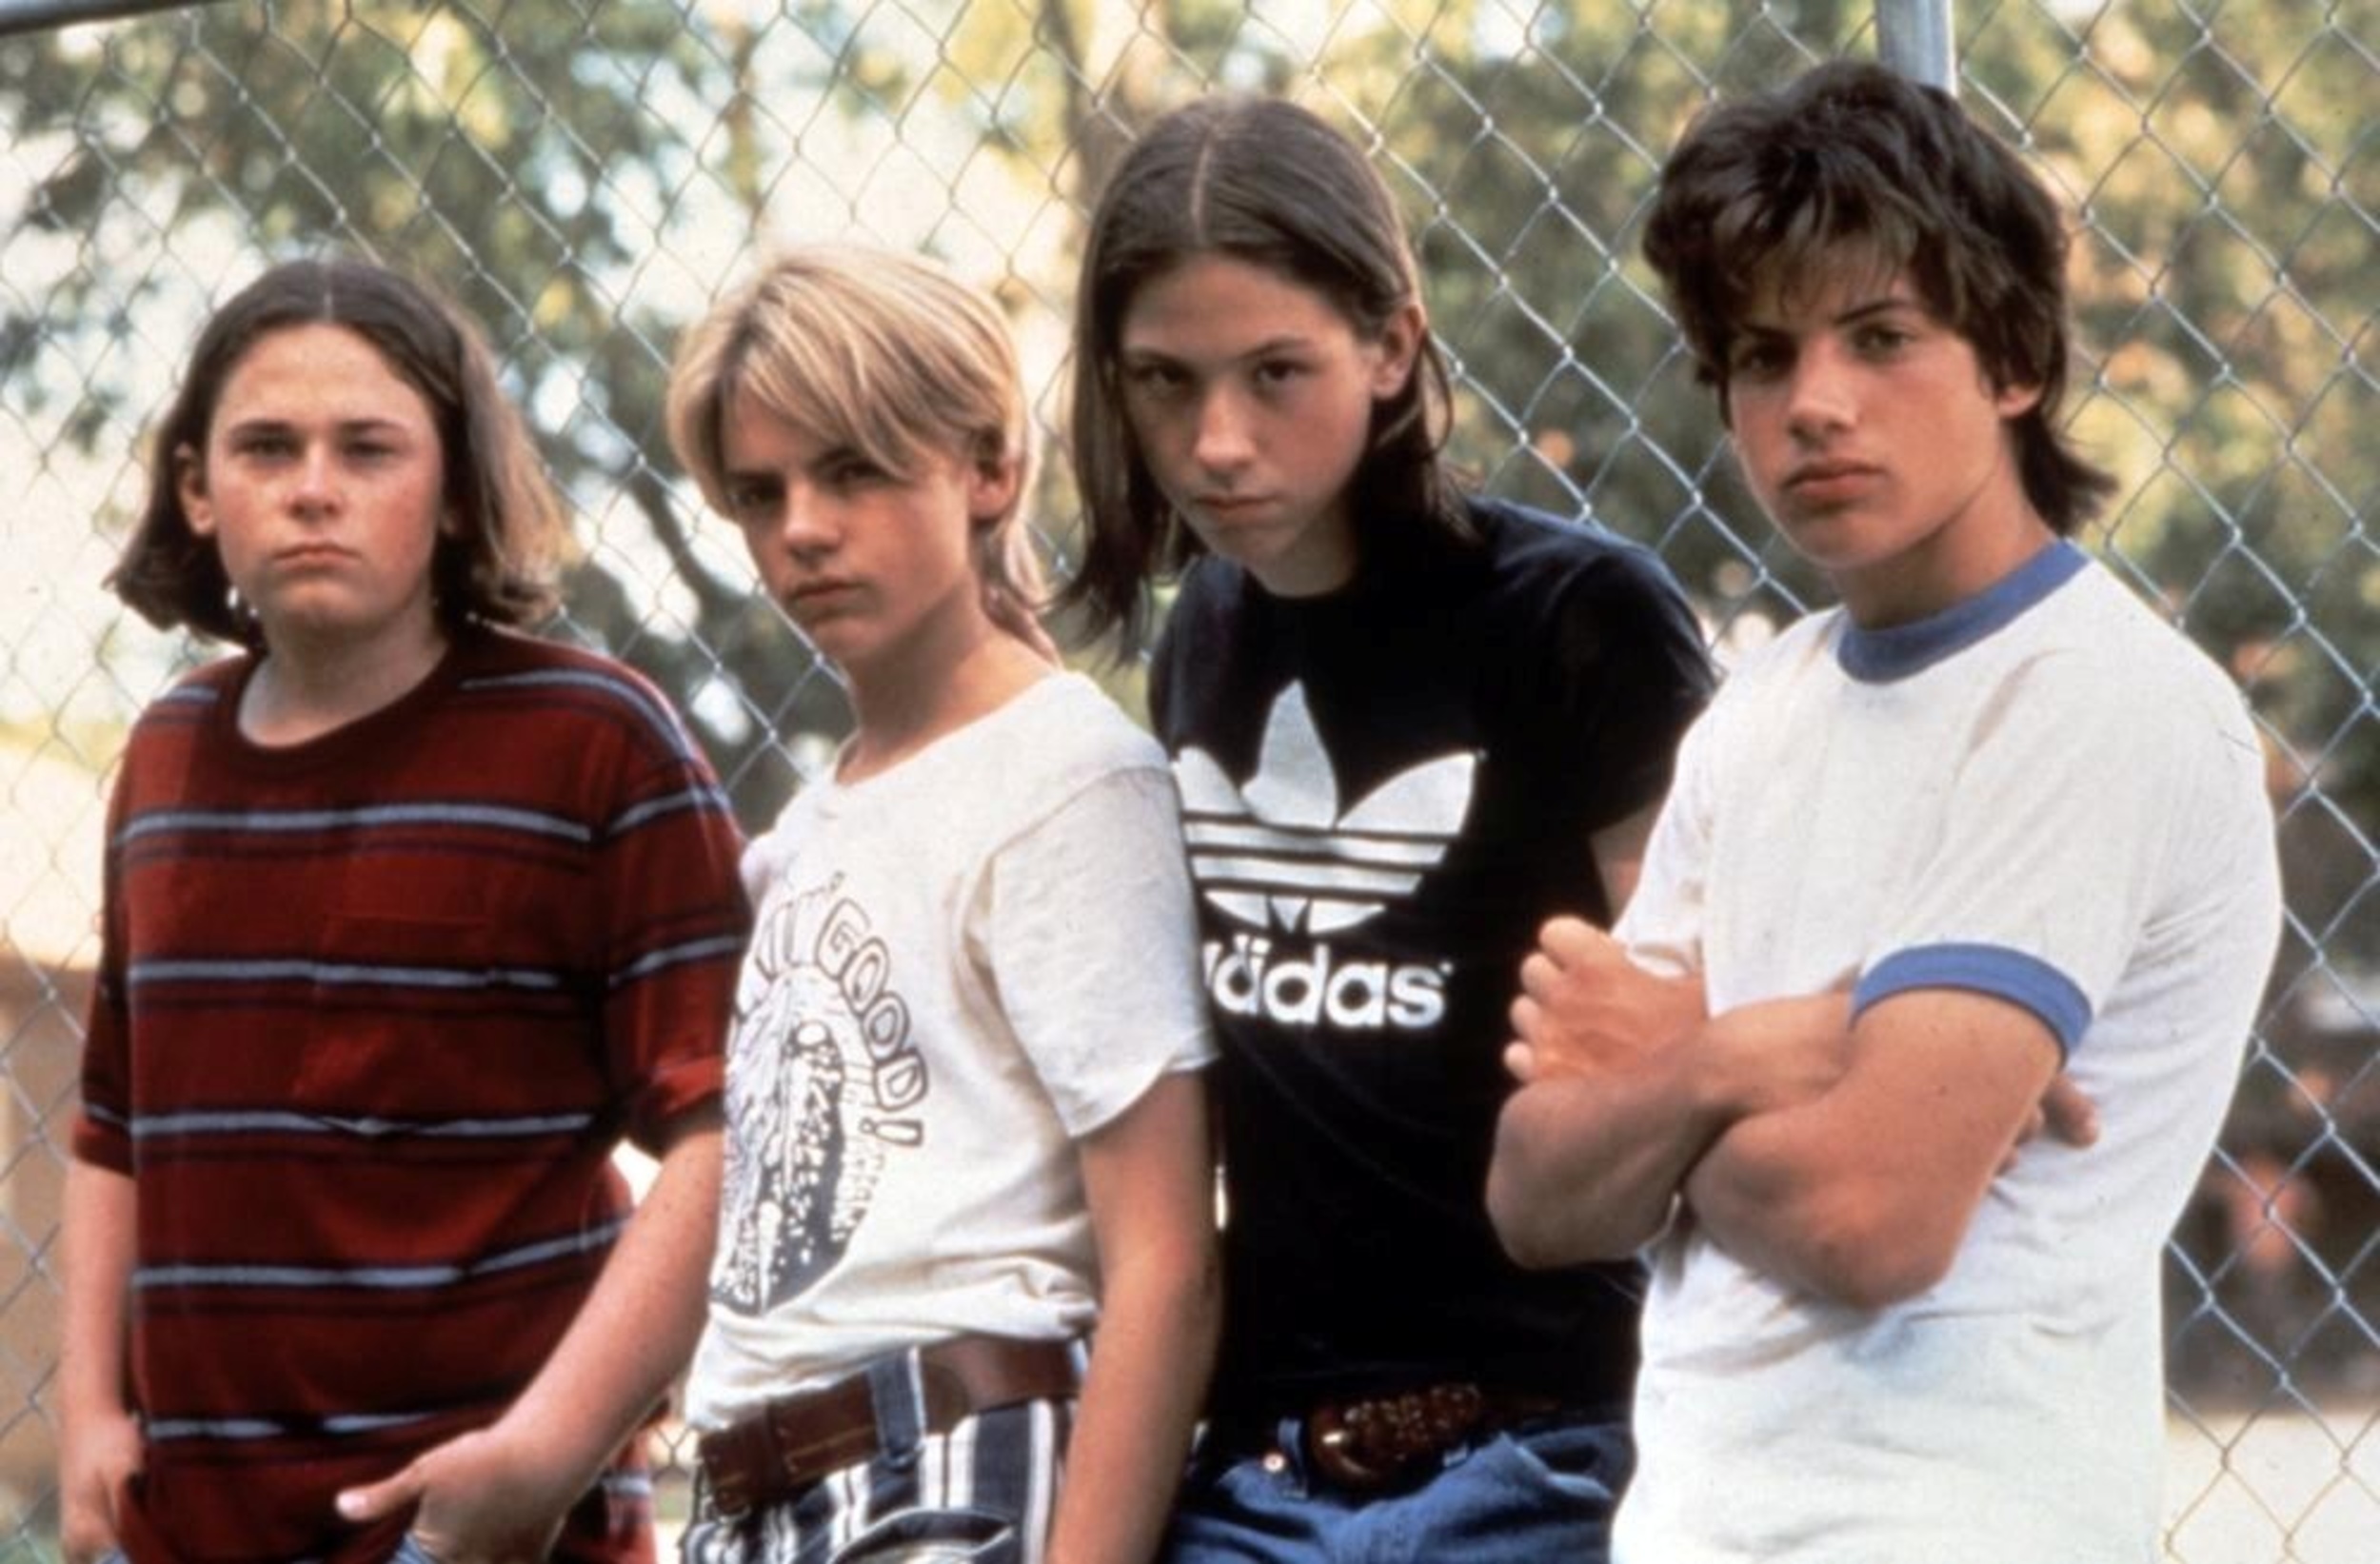 <p>This won't be the last we hear from director Richard Linklater. It's <a href="https://www.youtube.com/watch?v=3aQuvPlcB-8">May 28, 1976, the last day of school</a>. Freshmen like Mitch Kramer (Wiley Wiggins) and his buddies are looking to avoid getting "busted" by seniors such as Randall "Pink" Floyd (Jason London), who are looking for a good time. Over the day and night, numerous characters amid the ensemble cast learn a little about themselves.</p>